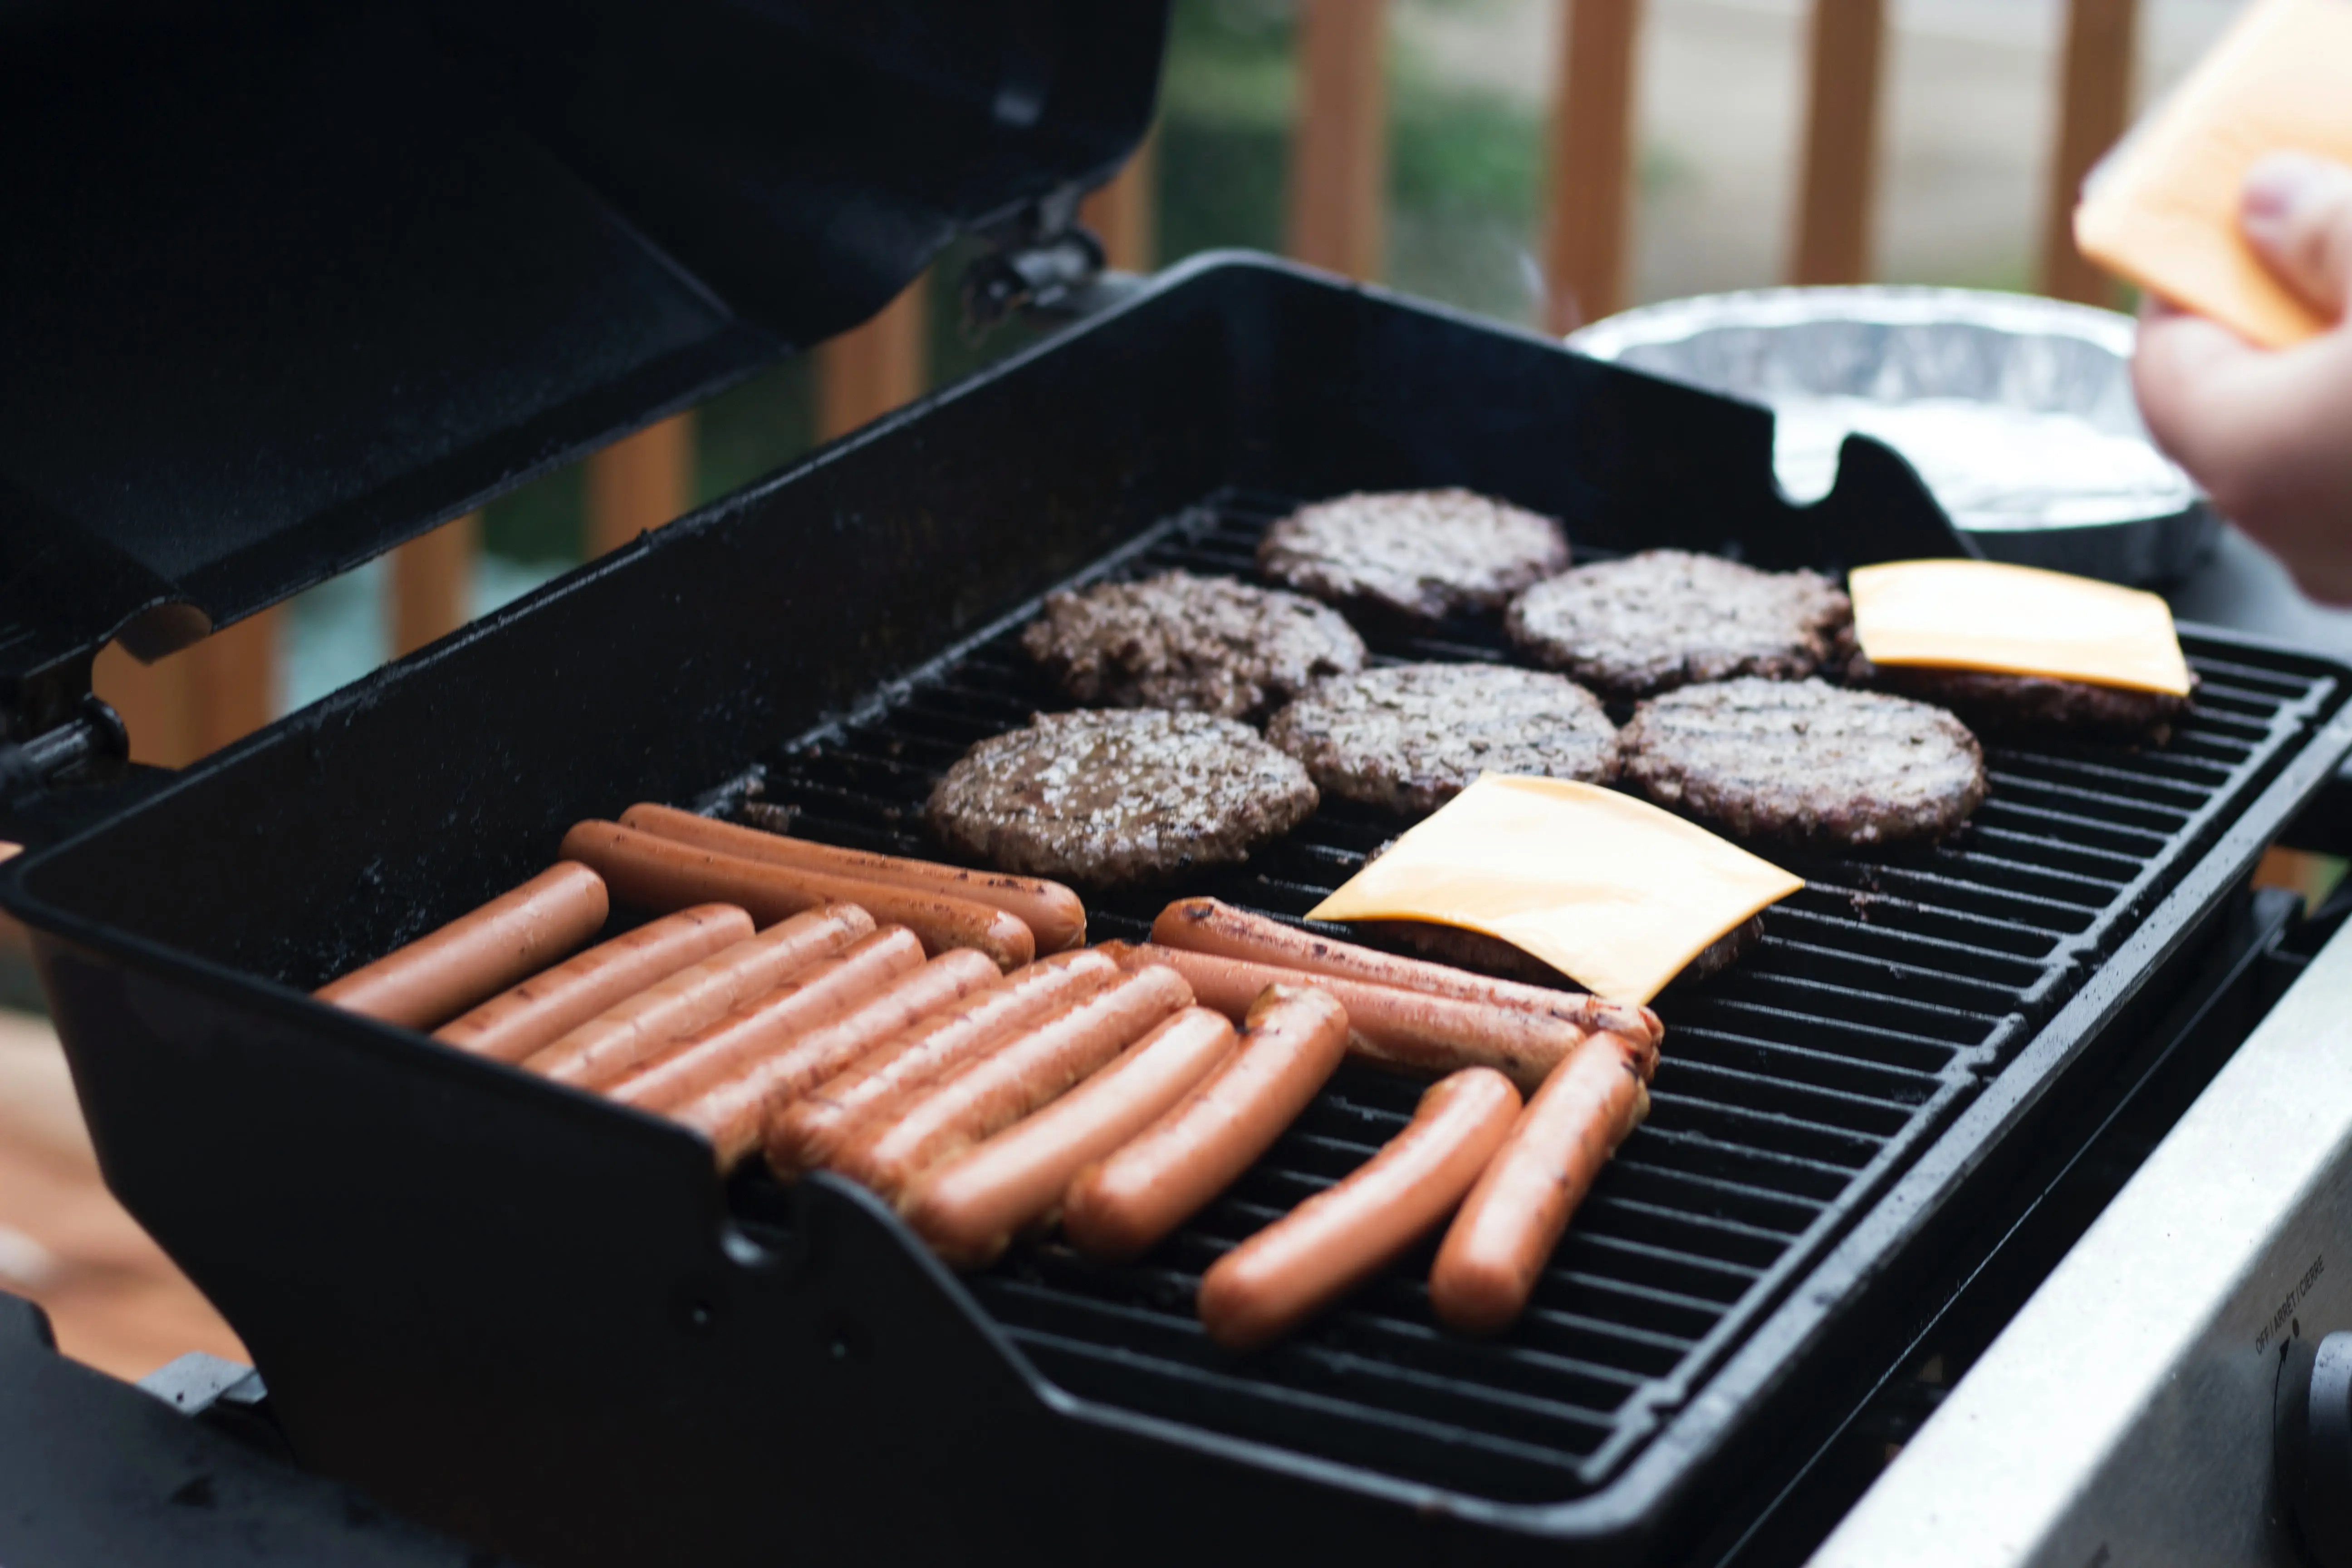 How To Use A Gas Grill Properly?